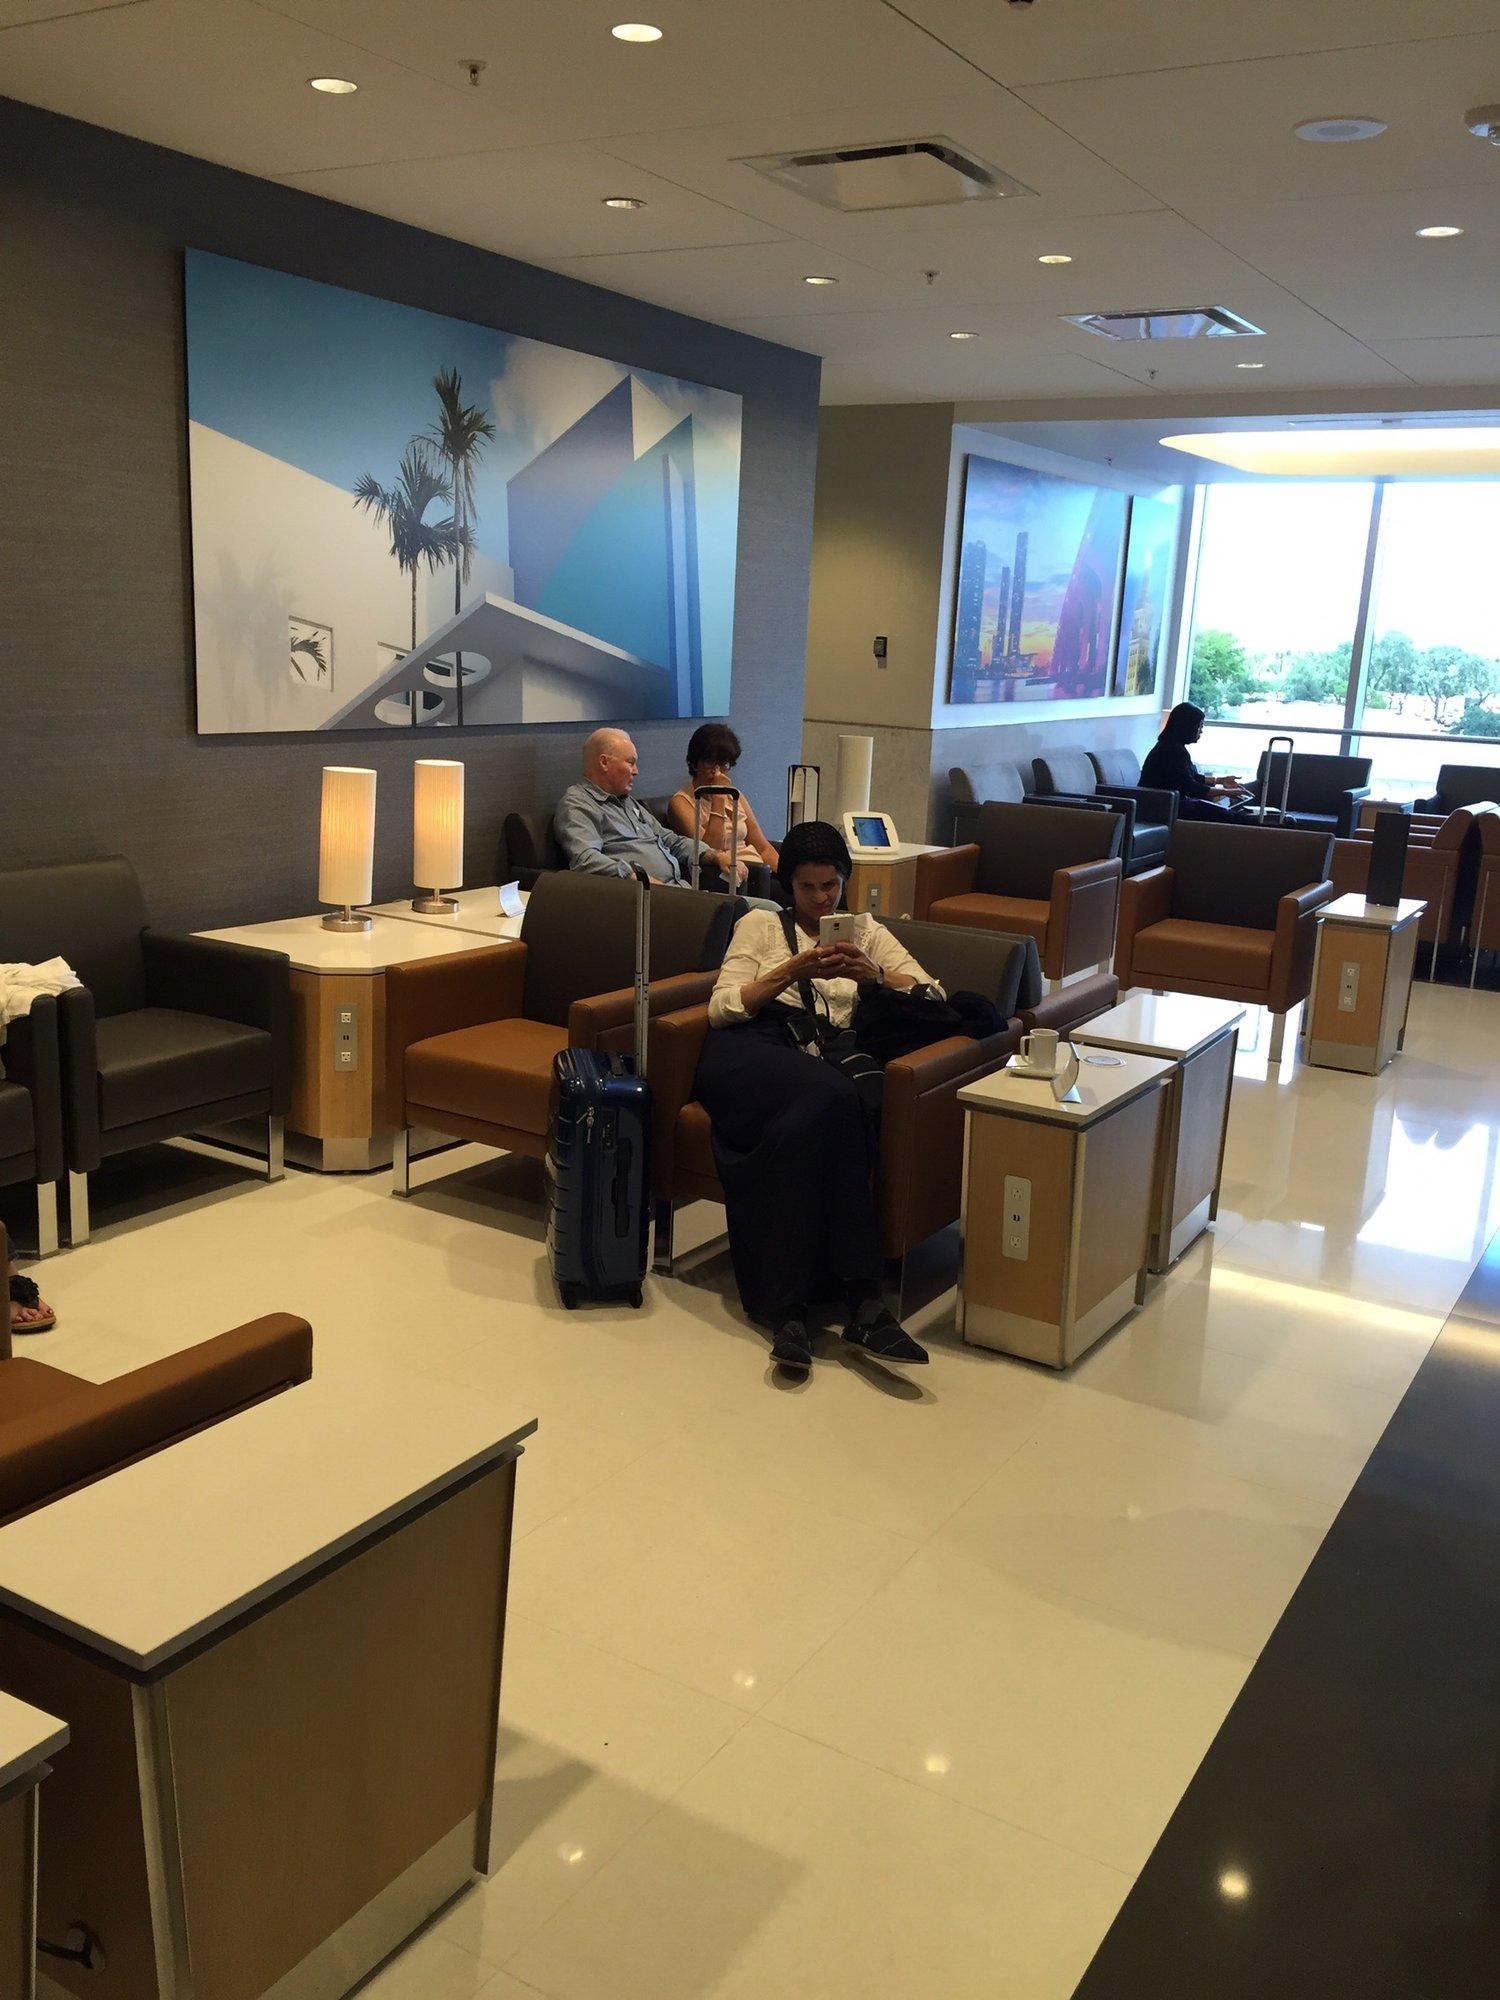 American Airlines Admirals Club (Gate D15) image 14 of 25